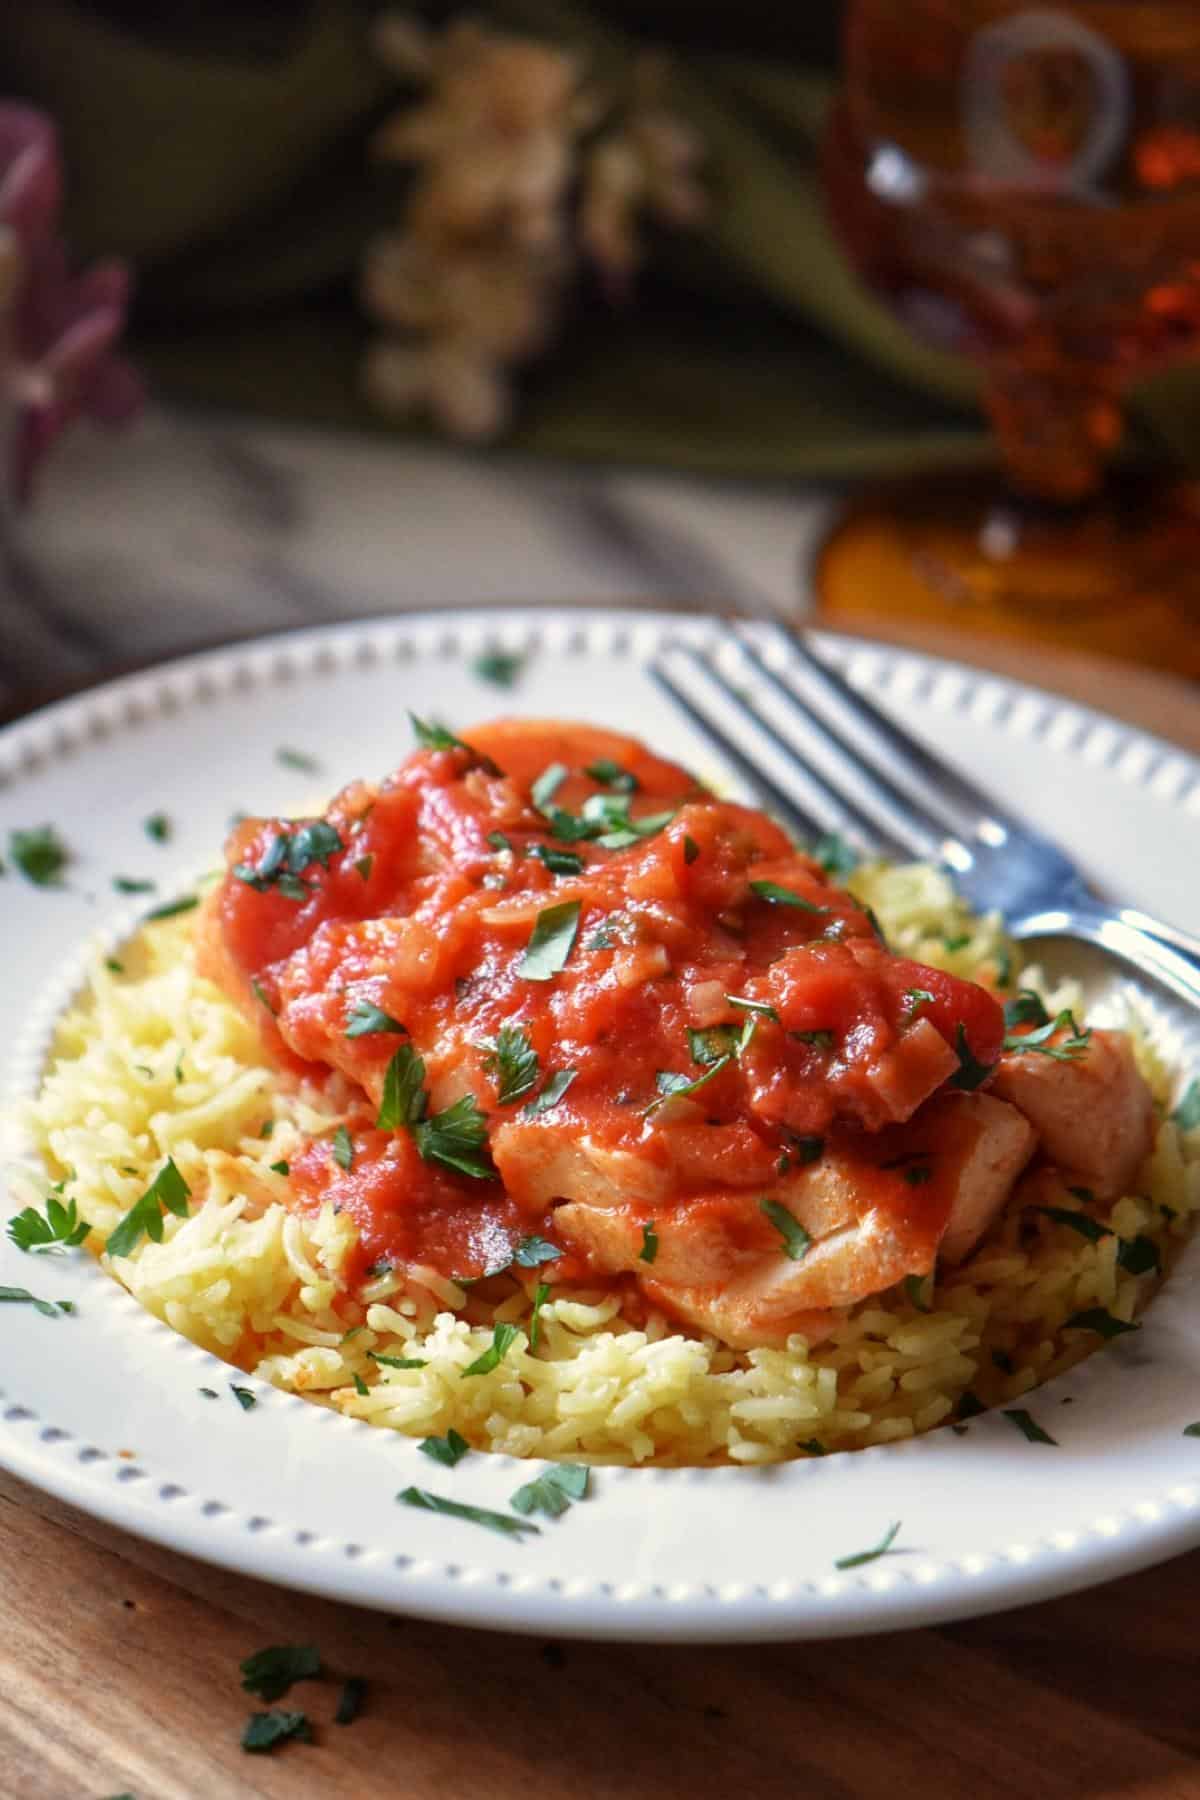 A piece of Italian cod topped with tomato sauce over a bed of rice.